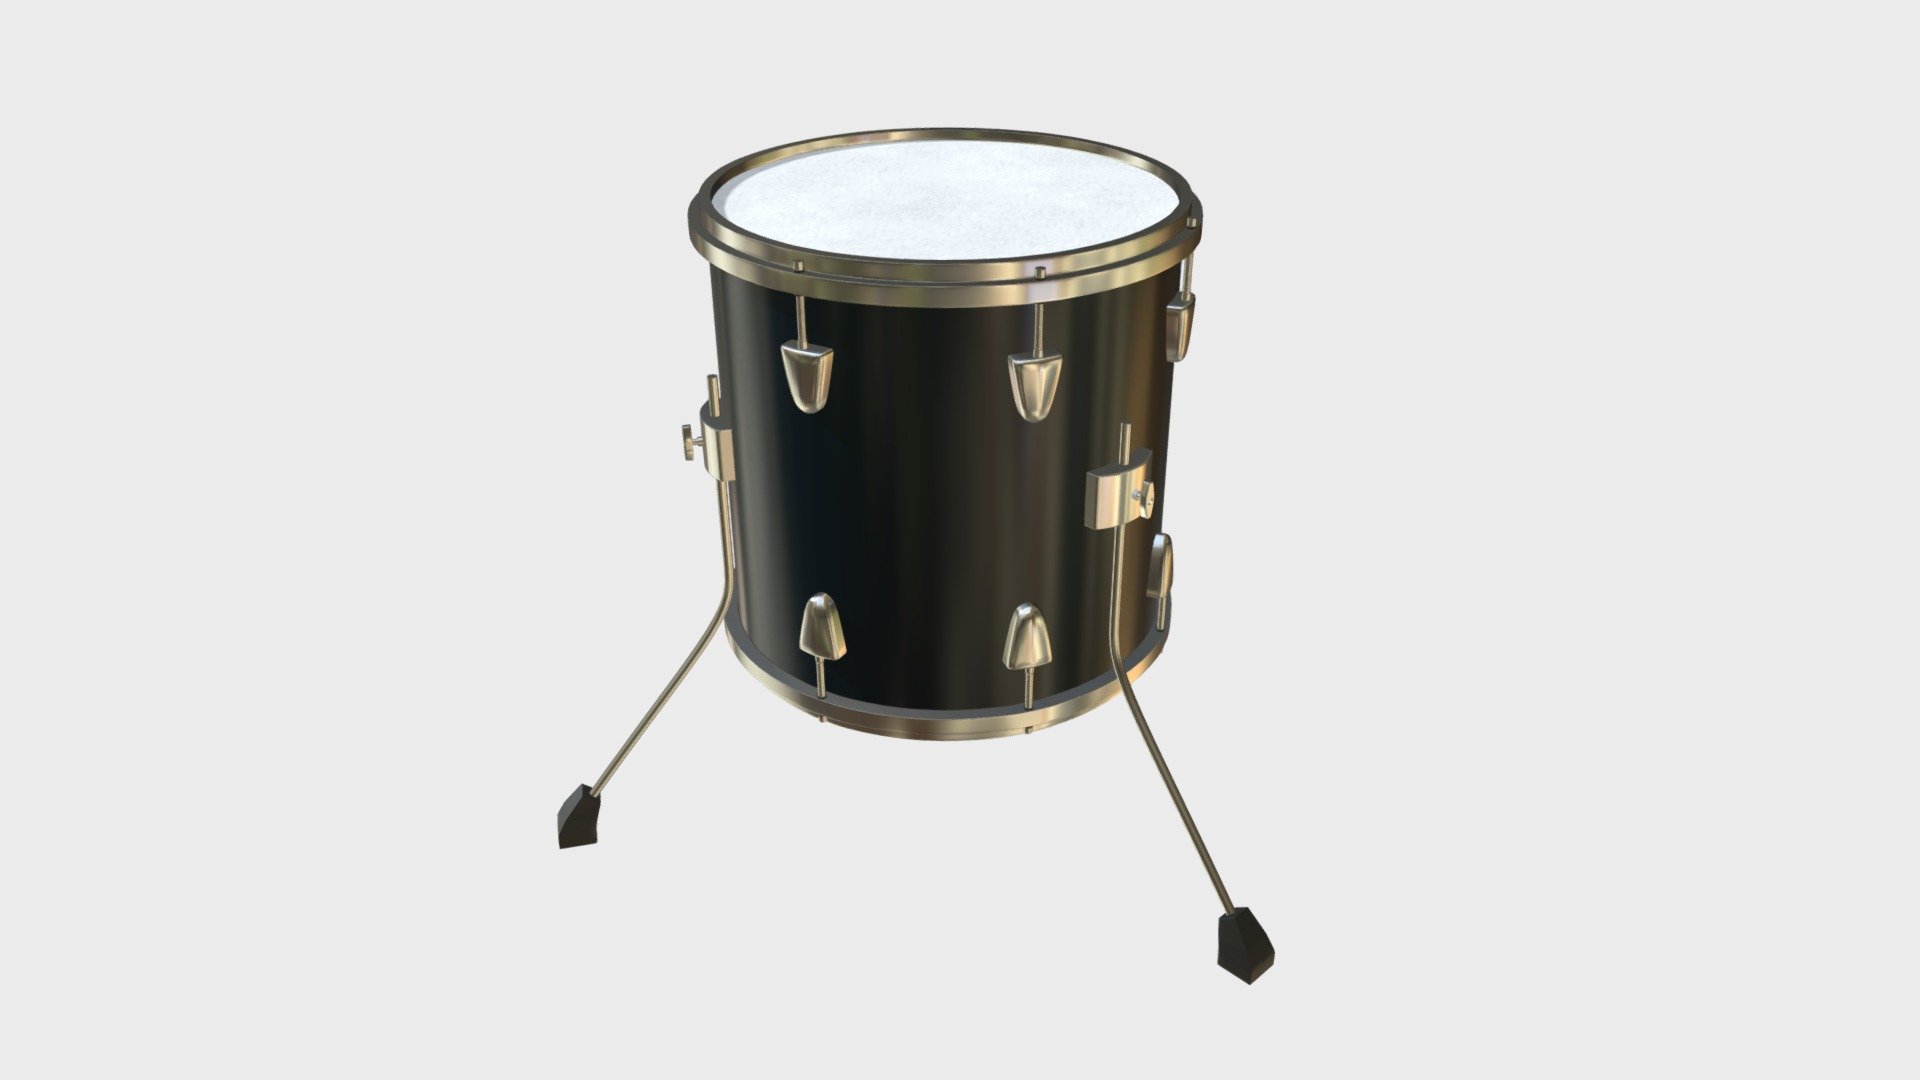 === The following description refers to the additional ZIP package provided with this model ===

Floor tom drum 3D Model. Production-ready 3D Model, with PBR materials, textures, non overlapping UV Layout map provided in the package.

Quads only geometries (no tris/ngons).

Formats included: FBX, OBJ; scenes: BLEND (with Cycles / Eevee PBR Materials and Textures); other: 16-bit PNGs with Alpha.

1 Object (mesh), 1 PBR Material, UV unwrapped (non overlapping UV Layout map provided in the package); UV-mapped Textures.

UV Layout maps and Image Textures resolutions: 2048x2048; PBR Textures made with Substance Painter.

Polygonal, QUADS ONLY (no tris/ngons); 74024 vertices, 73902 quad faces (147804 tris).

Real world dimensions; scene scale units: cm in Blender 3.3 (that is: Metric with 0.01 scale).

Uniform scale object (scale applied in Blender 3.3) 3d model